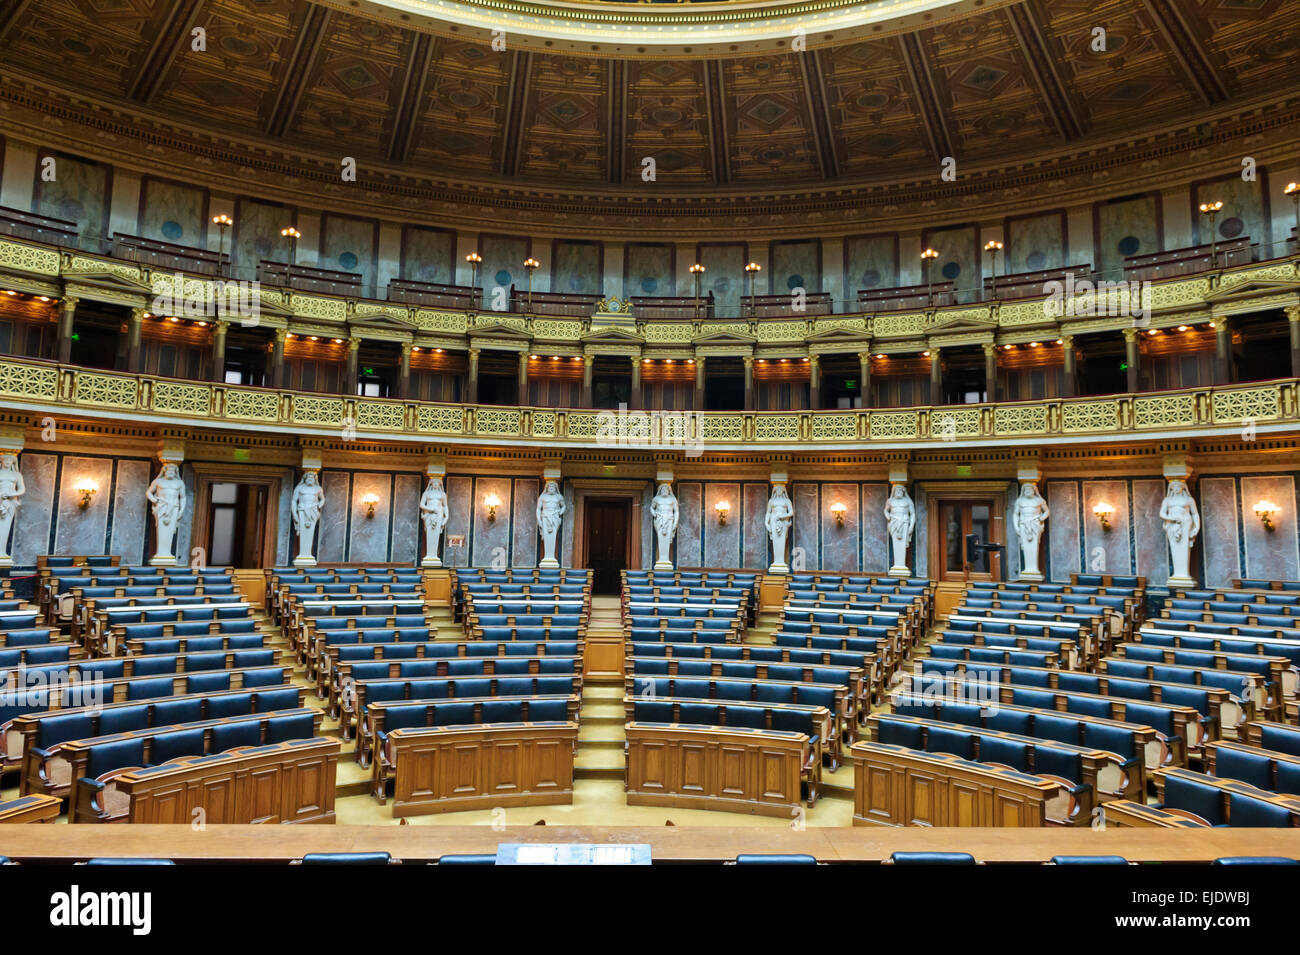 The Federal Assembly Chamber at the Austrian Parliament building, Vienna, Austria. Stock Photo